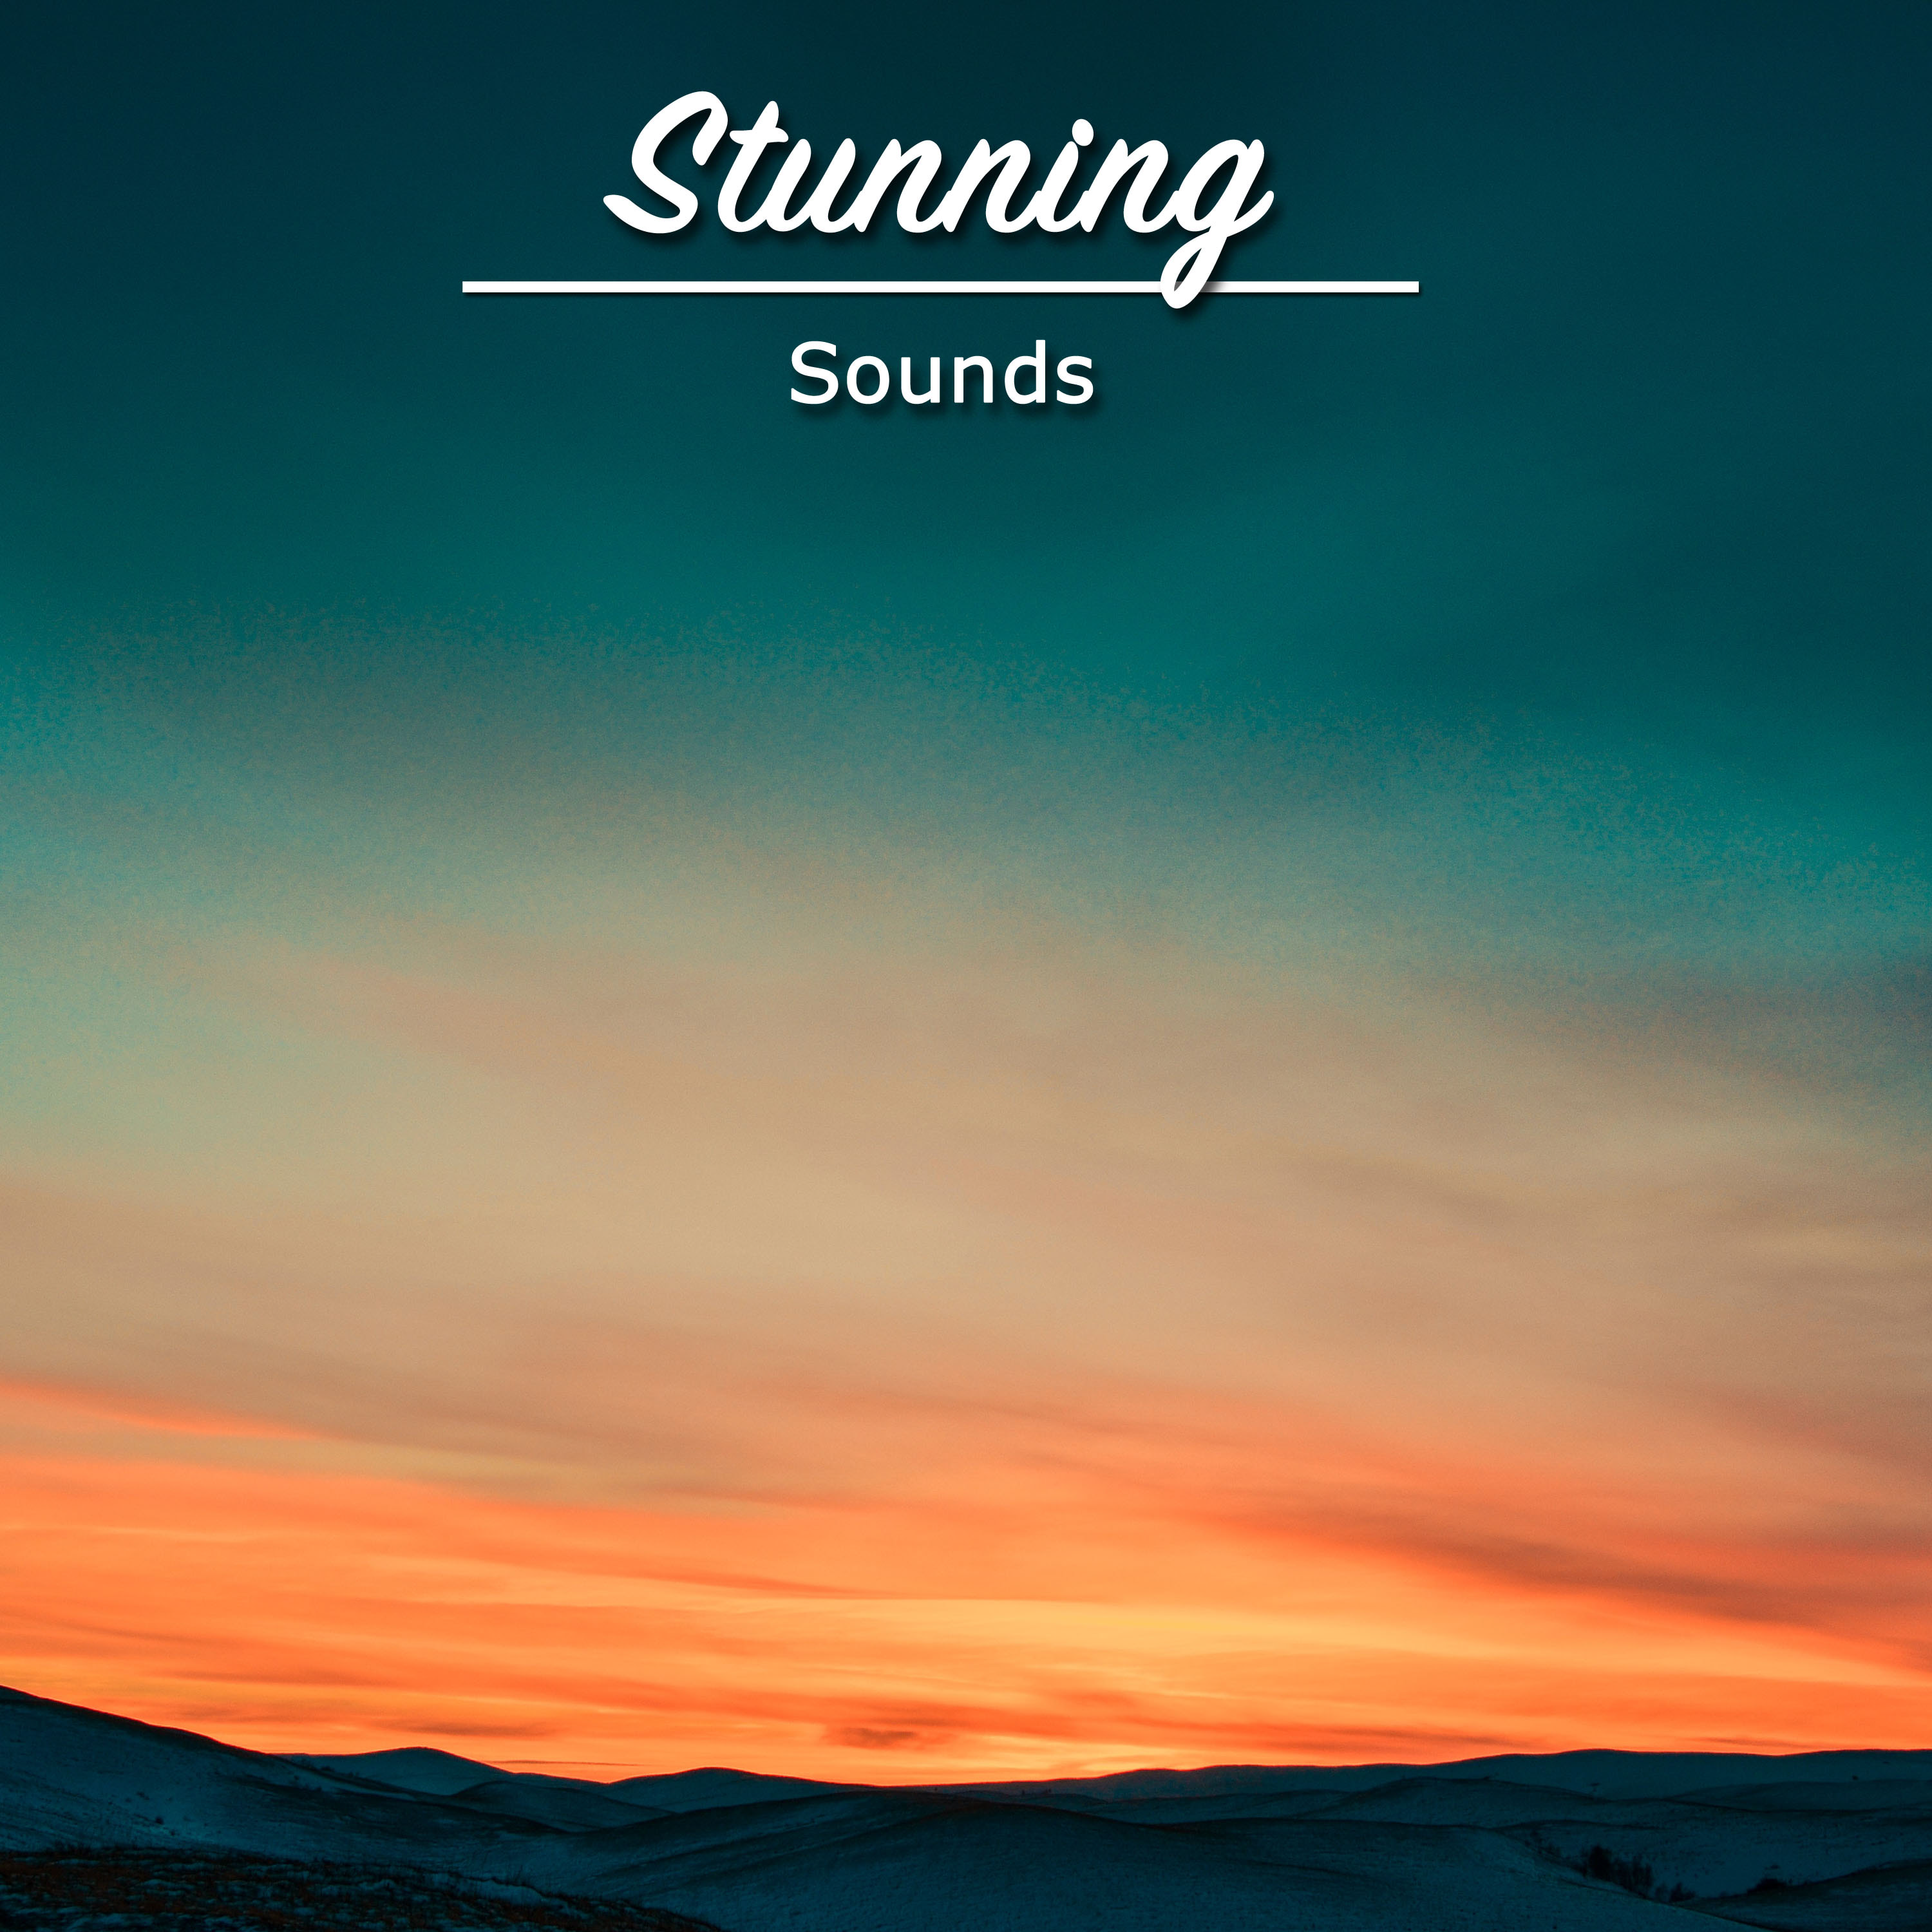 #1 Hour of Stunning Sounds for Yoga, Zen and Meditation